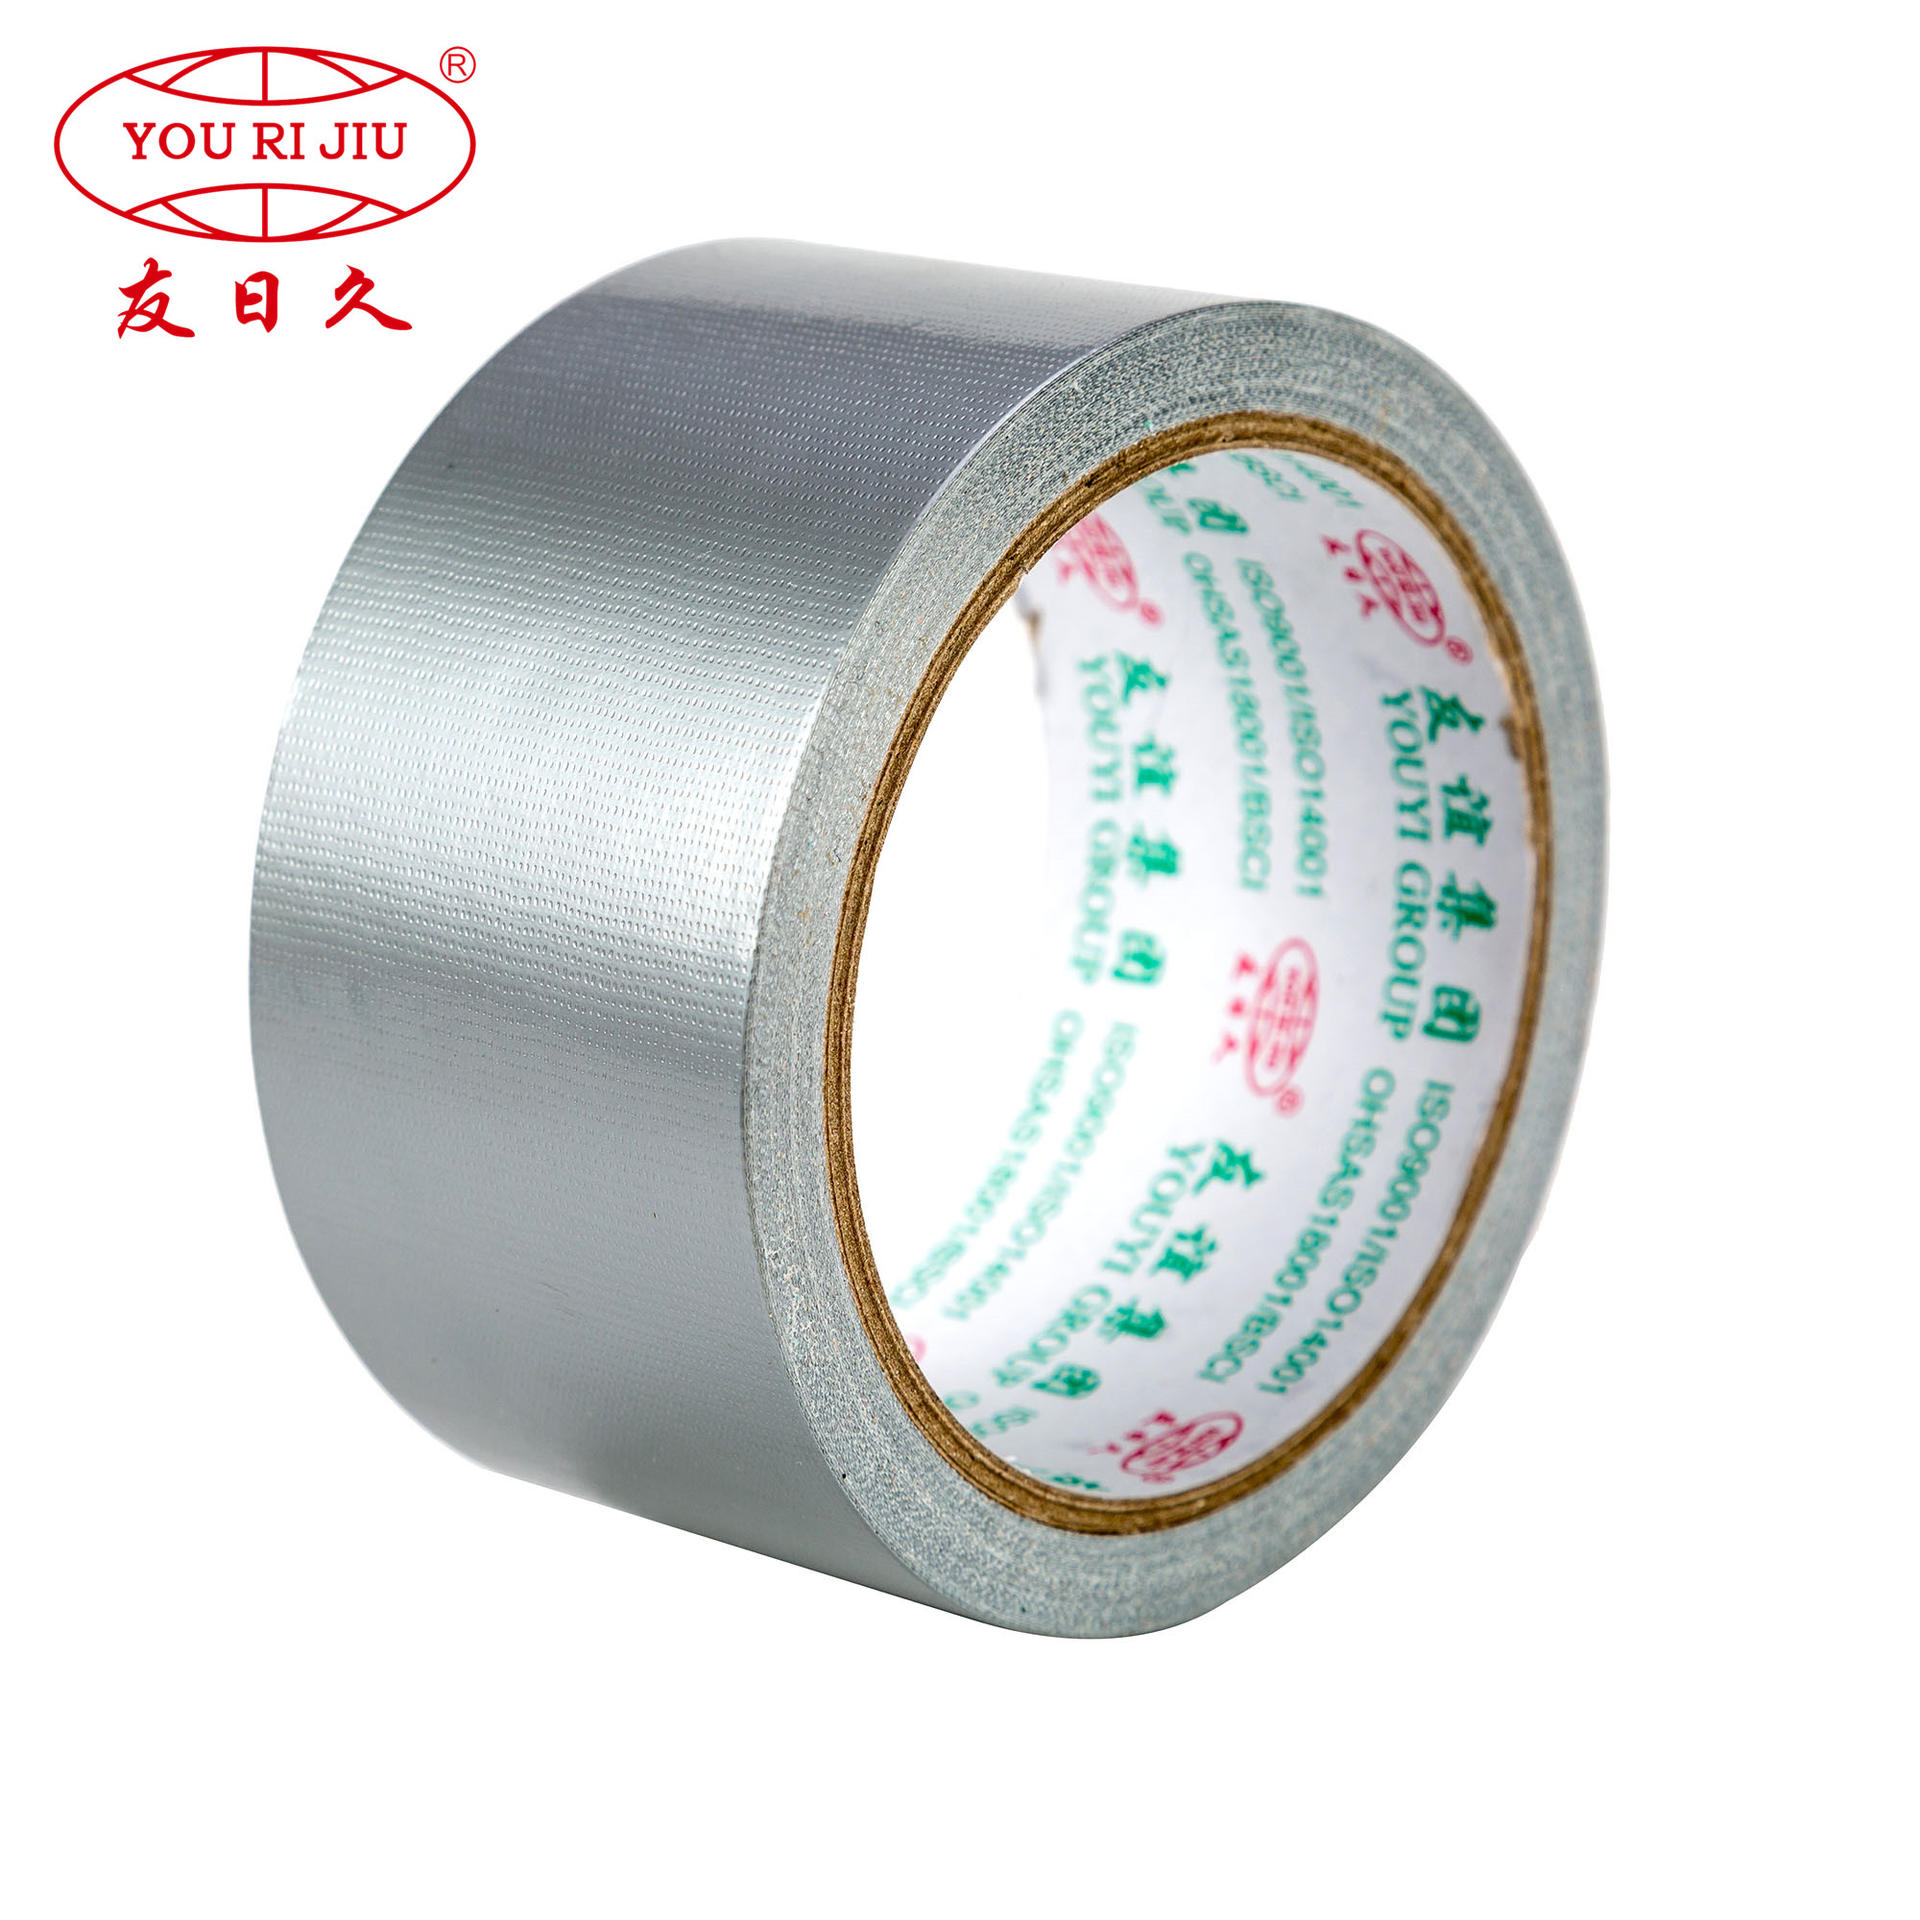 Wholesale factory sale custom printed colored duct tape